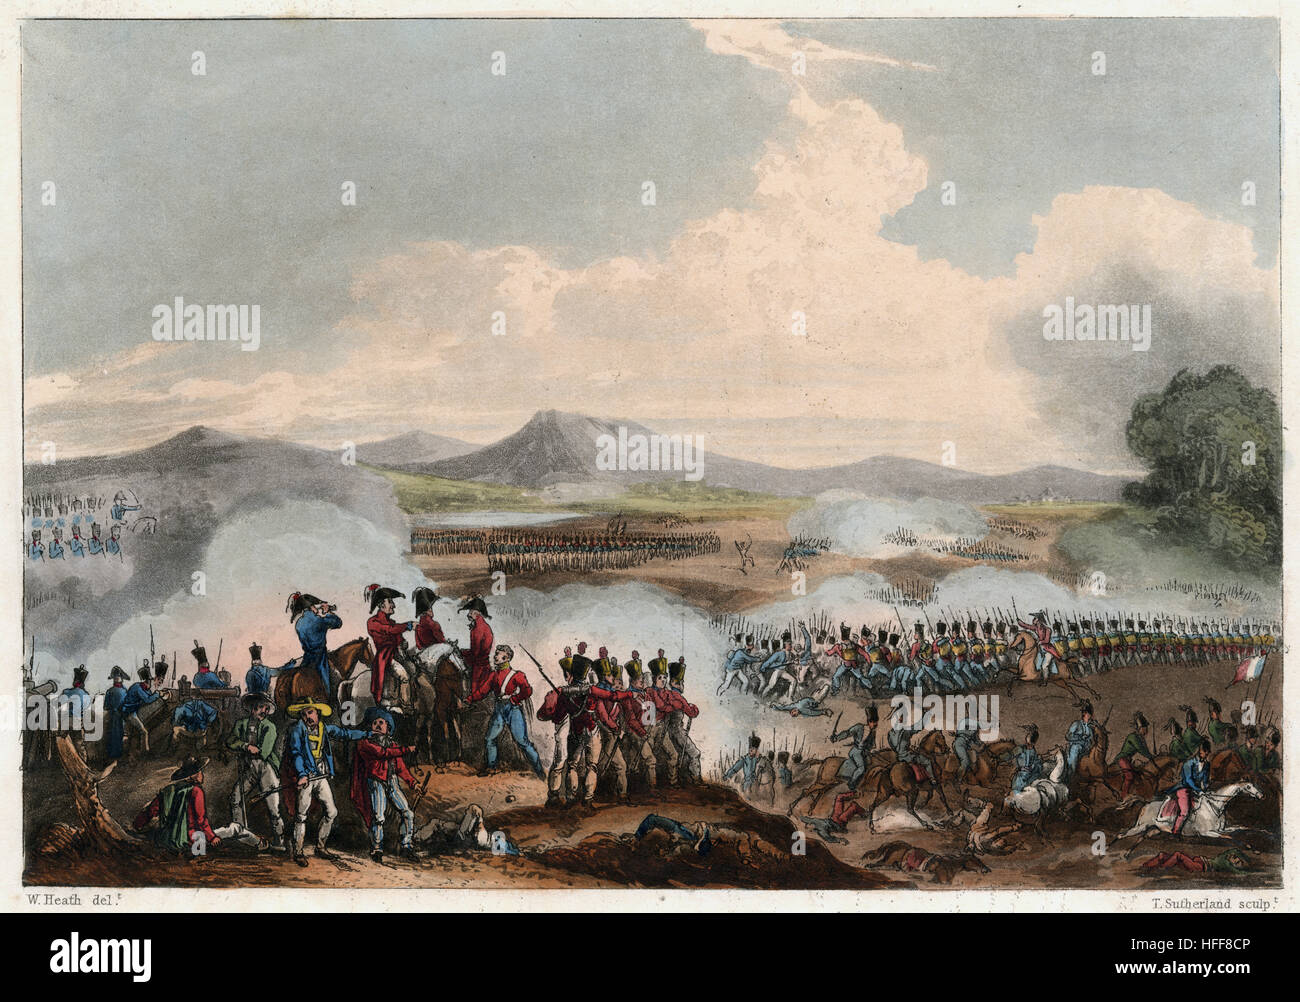 Antique 1815 engraving, hand-colored scene of the Battle of Talavera. The Battle of Talavera (27–28 July 1809) was fought just outside the town of Talavera de la Reina, Spain southwest of Madrid, during the Peninsular War. An Anglo-Spanish army under Sir Arthur Wellesley combined with a Spanish army under General Cuesta in operations against French-occupied Madrid. SOURCE: ORIGINAL ENGRAVING. Stock Photo